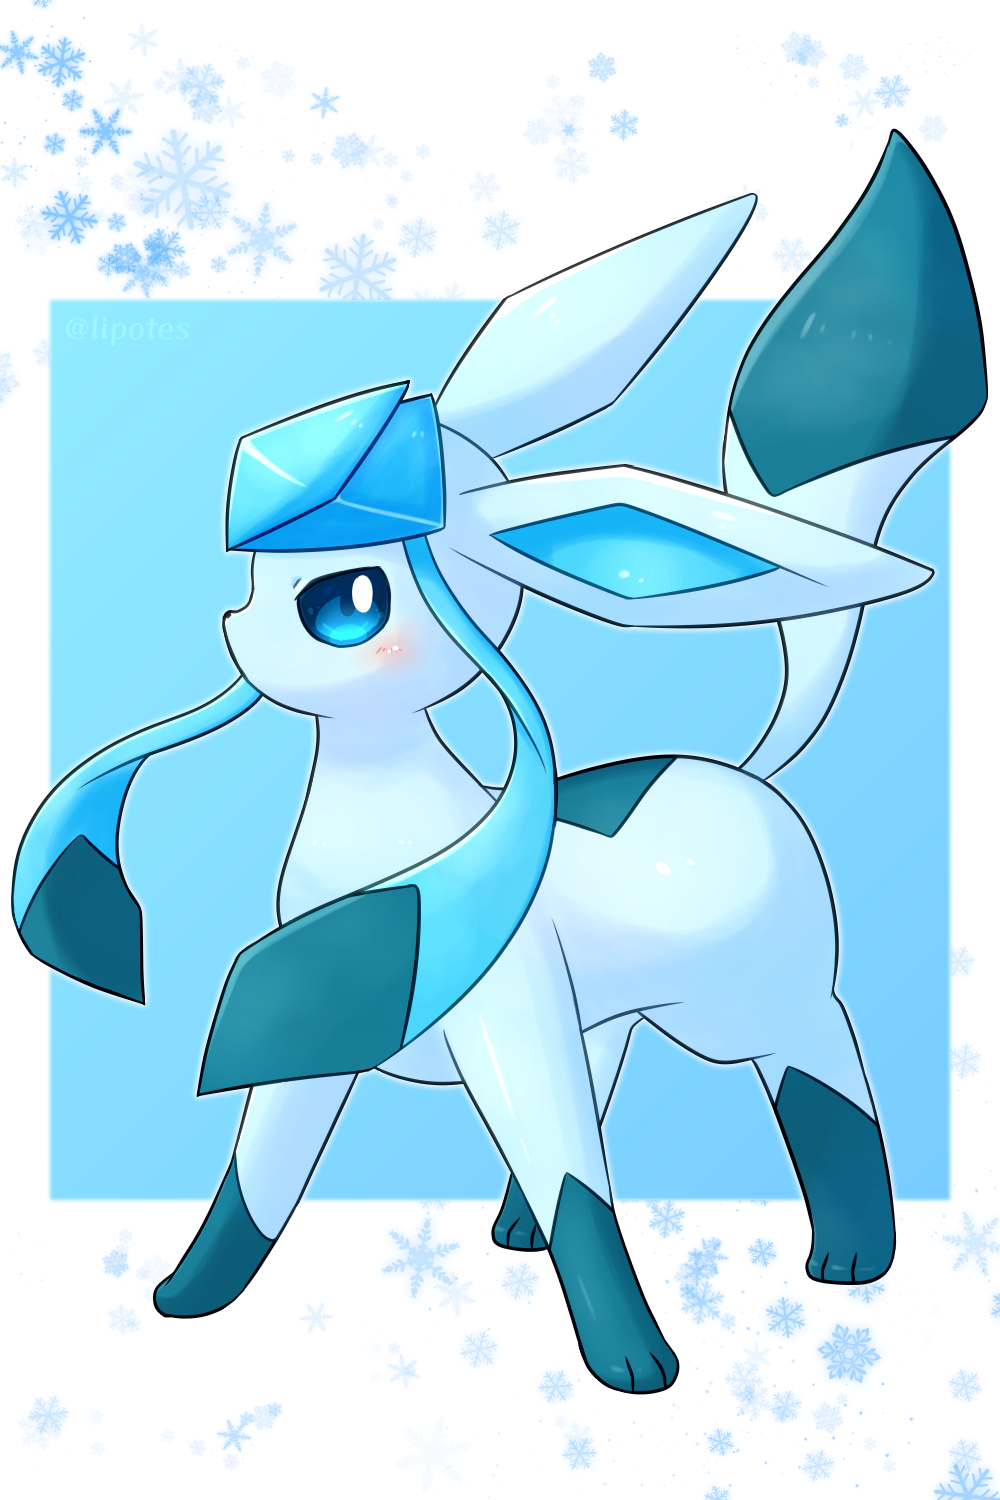 GLACEON POKEMON PNG HD Images